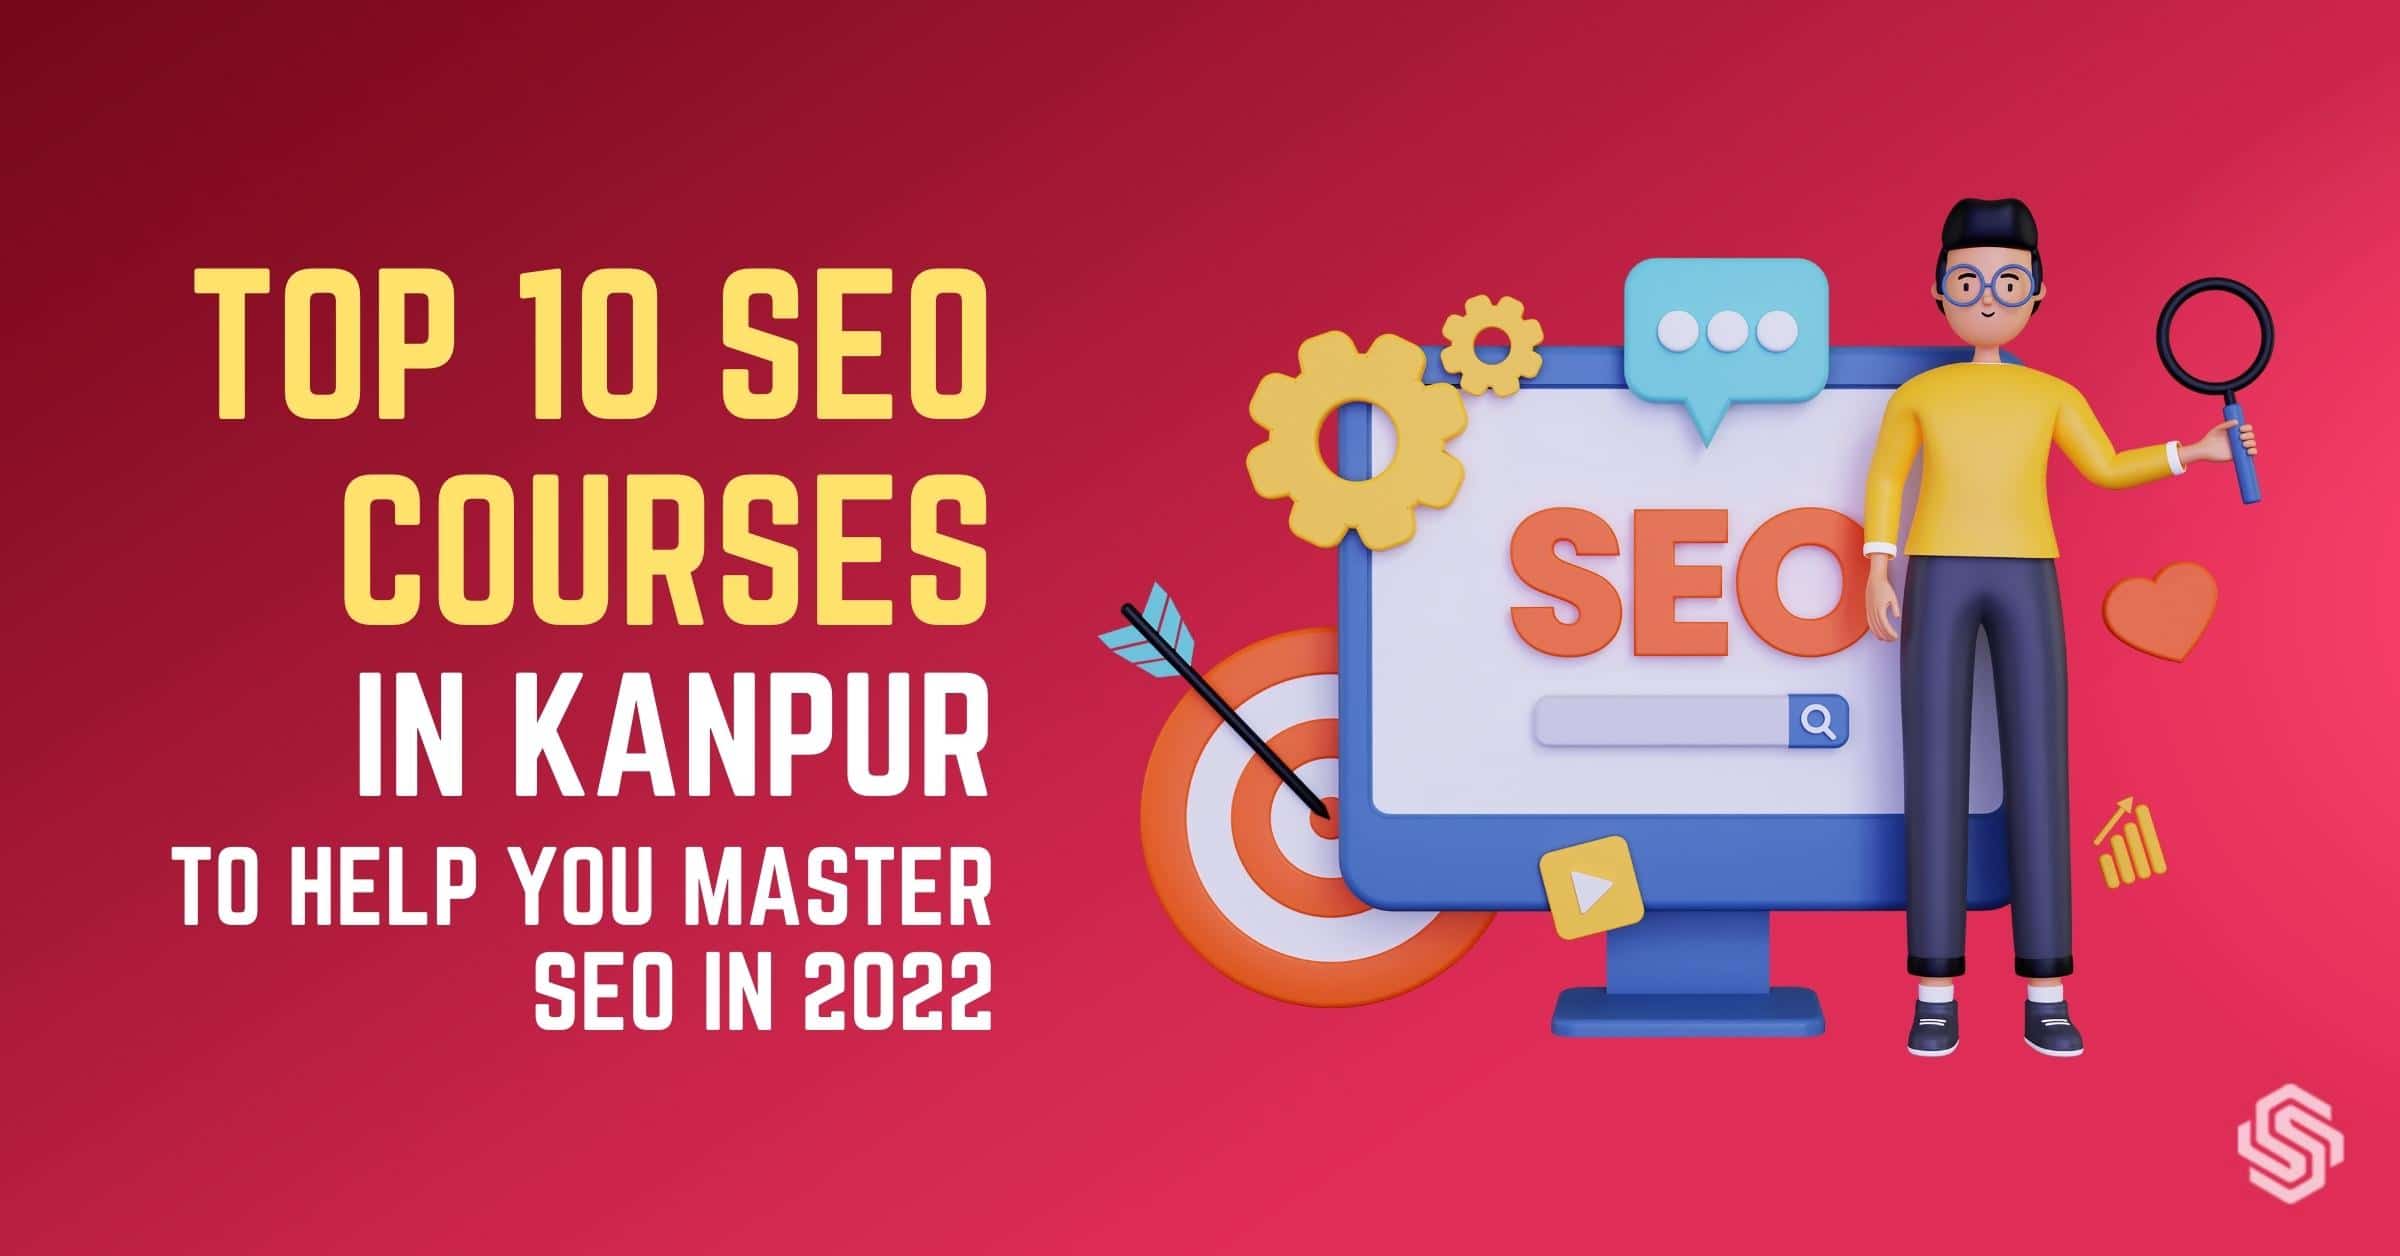 SEO Courses in Kanpur